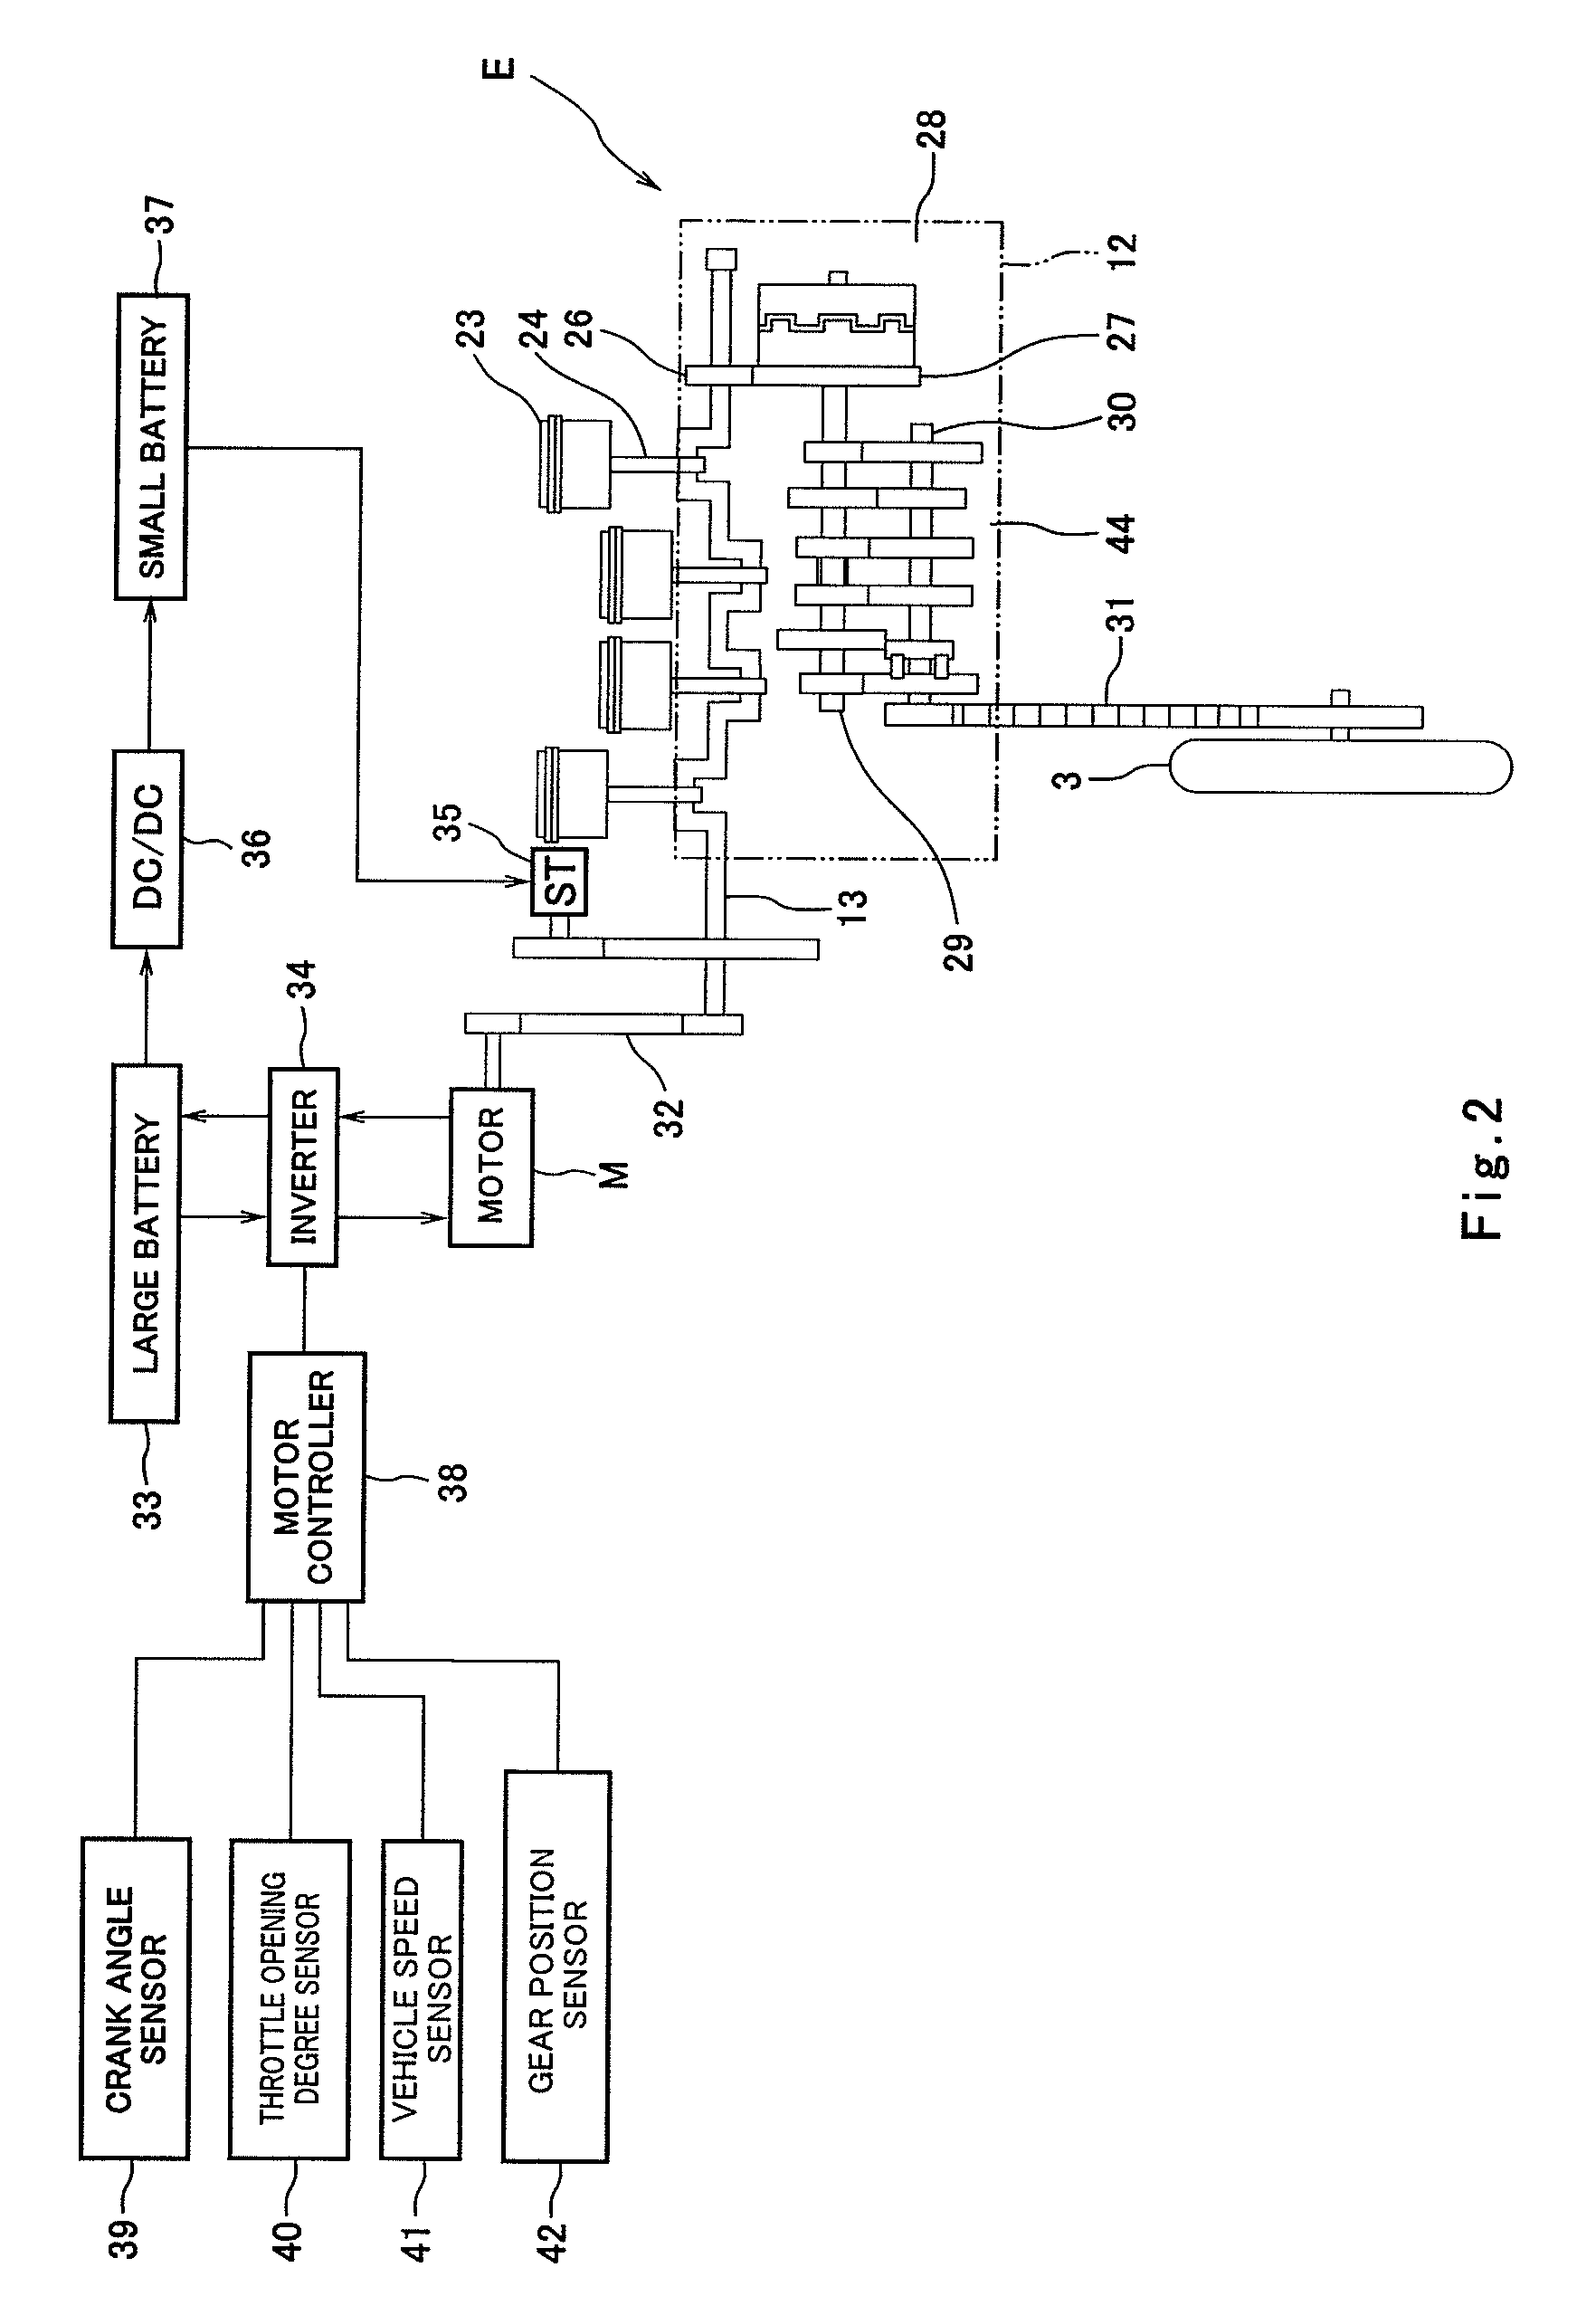 Vehicle and motor controller for vehicle